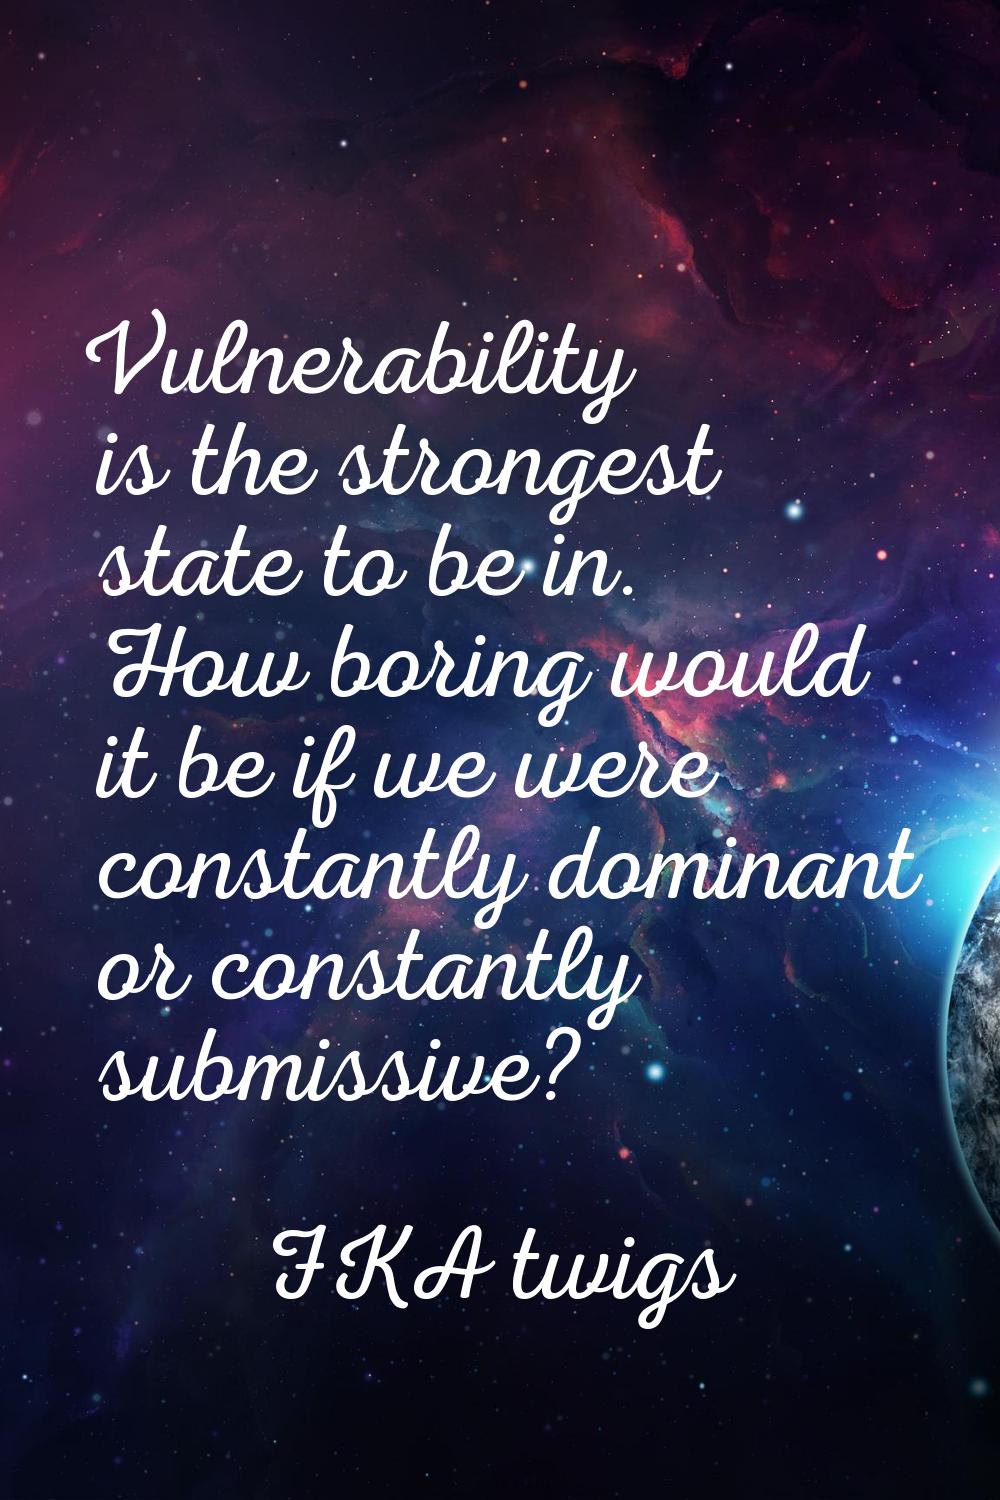 Vulnerability is the strongest state to be in. How boring would it be if we were constantly dominan